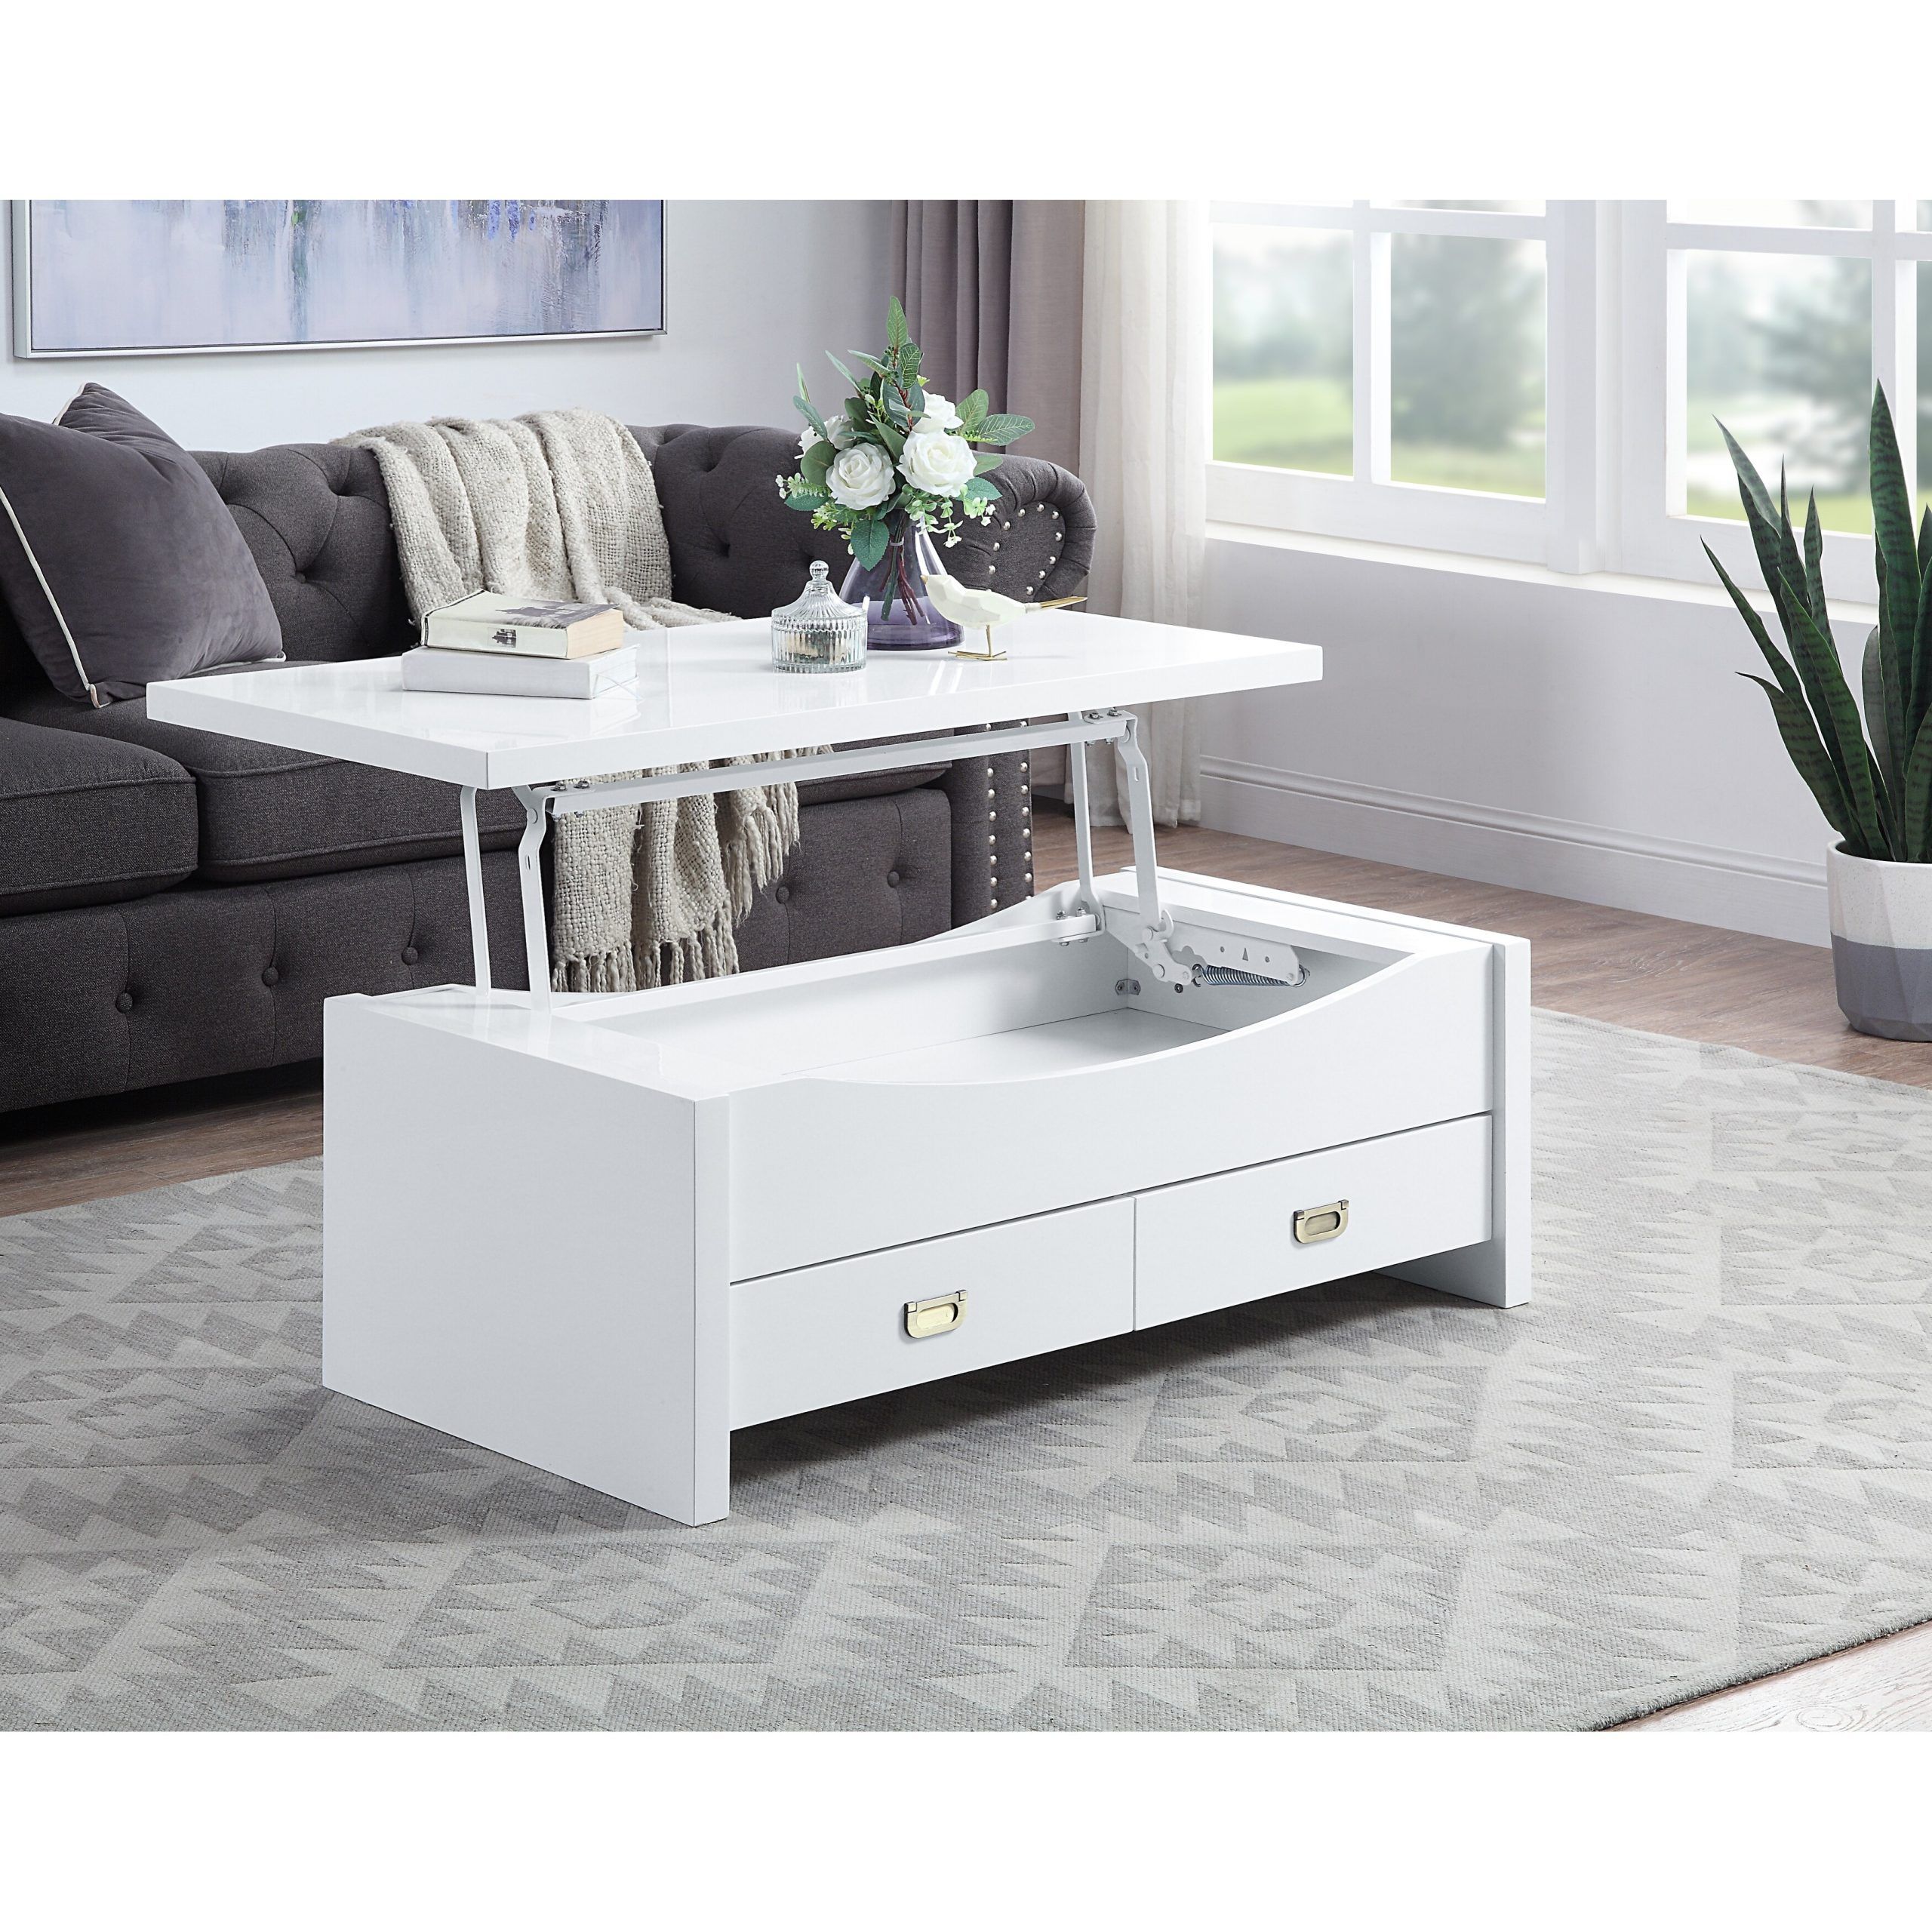 Aoolive Lift Top Coffee Table With Drawers In High Gloss White Finish – On  Sale – Bed Bath & Beyond – 35561340 In High Gloss Lift Top Coffee Tables (View 5 of 15)